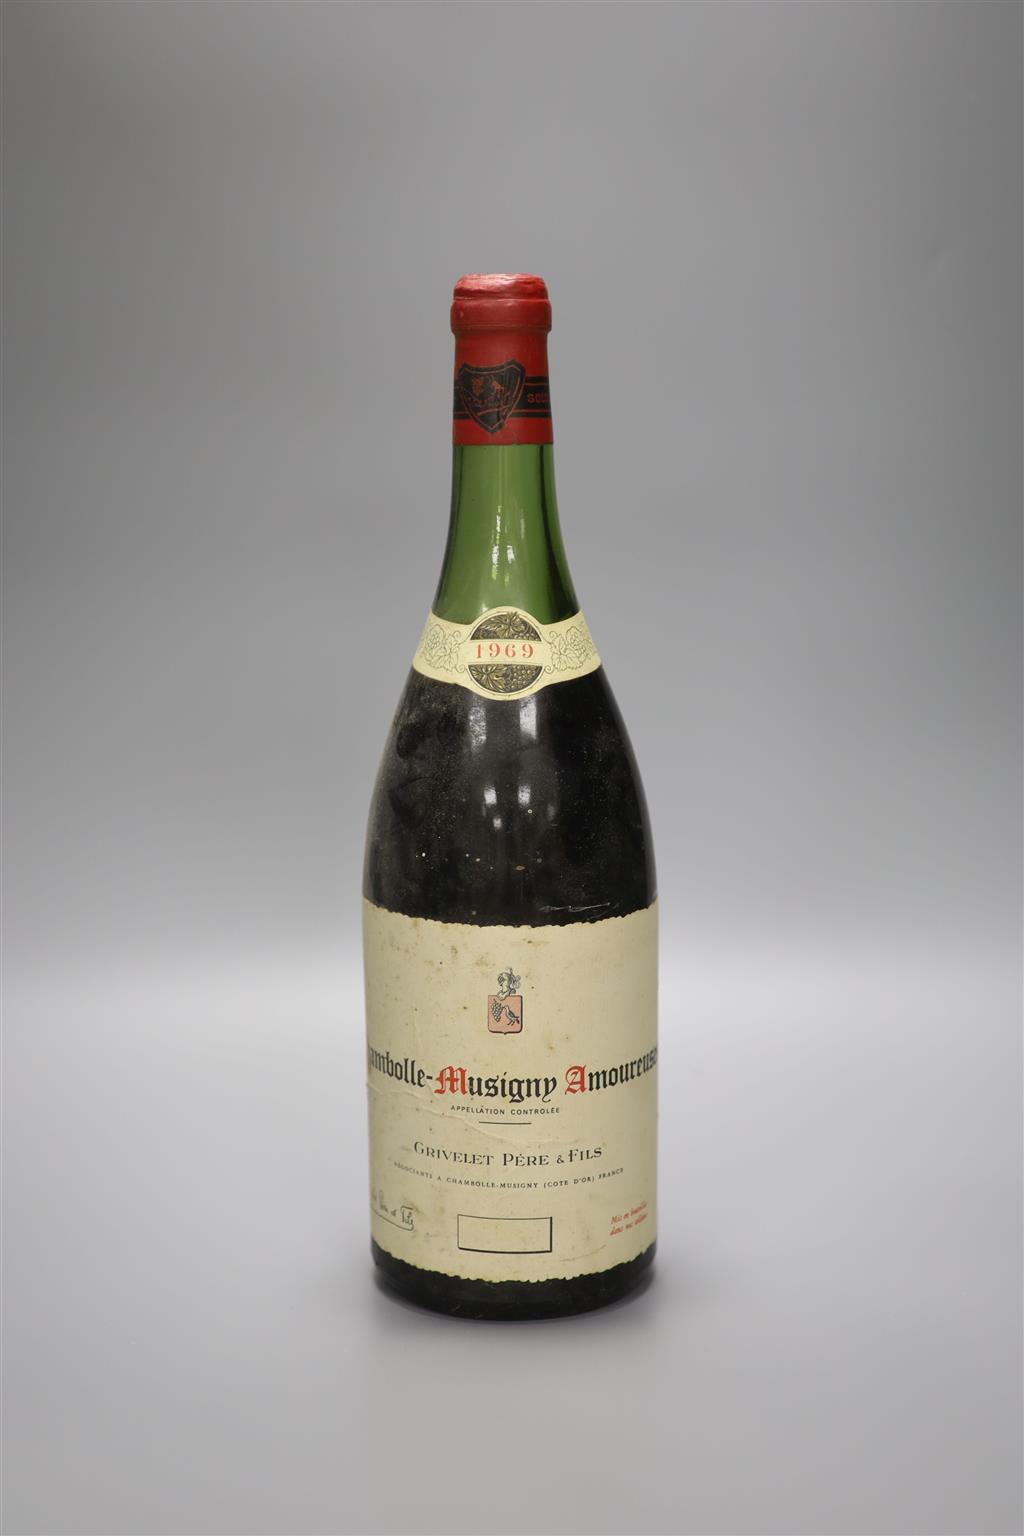 A magnum of Chambolle-Musigny Amoureuses 1969